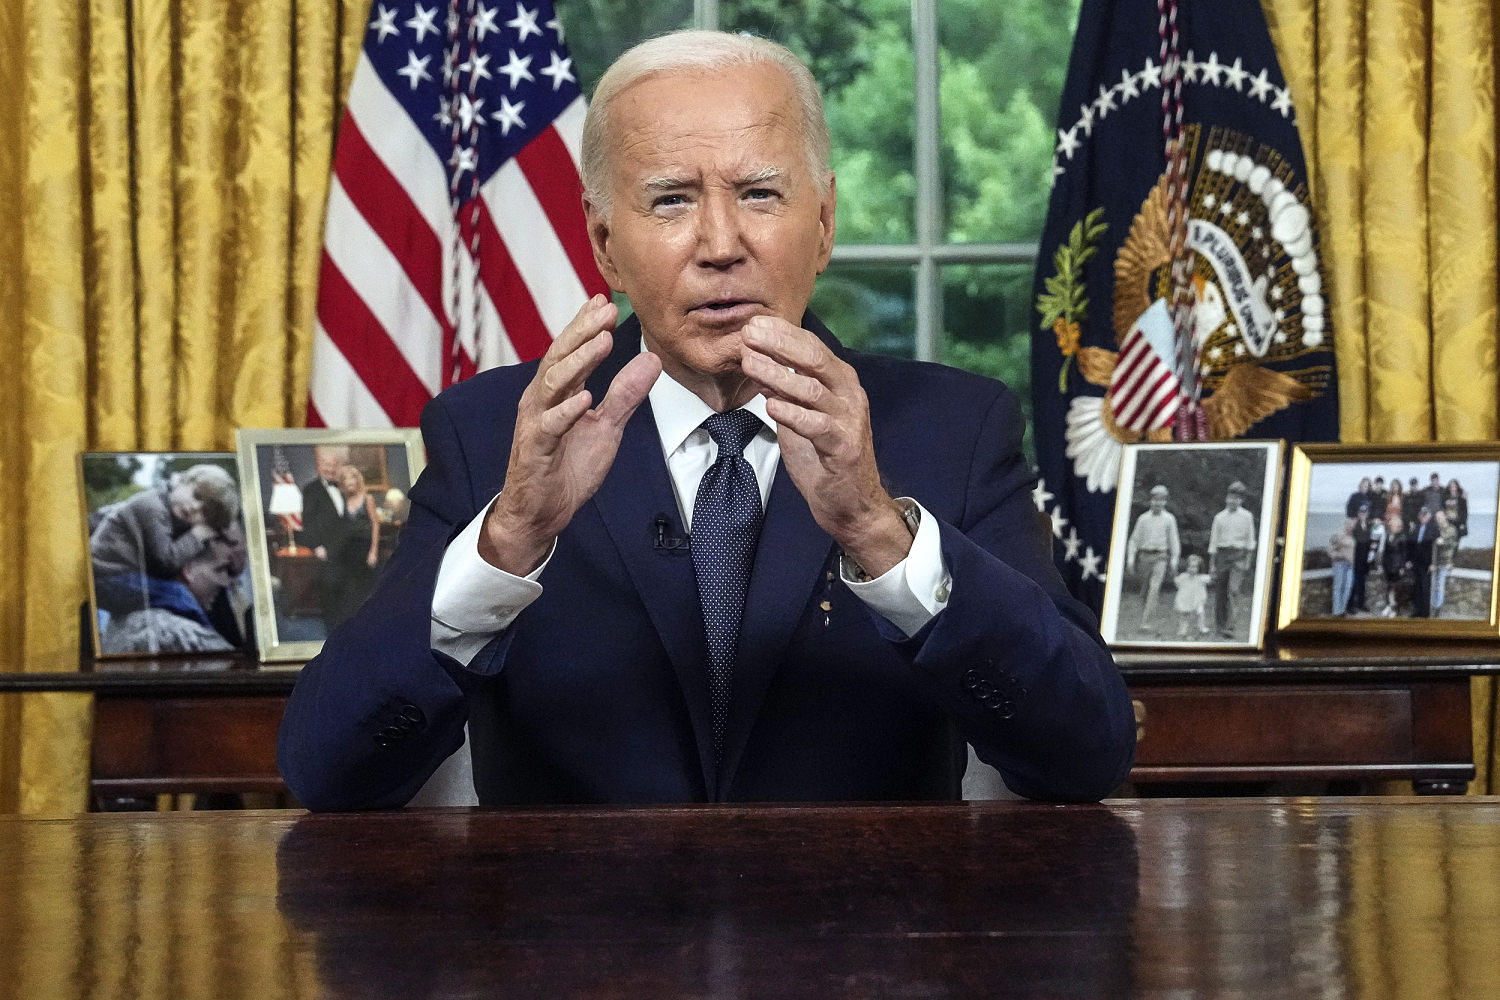 Biden calls for unity after Trump assassination attempt and '90210' star Shannen Doherty remembered: Morning Rundown